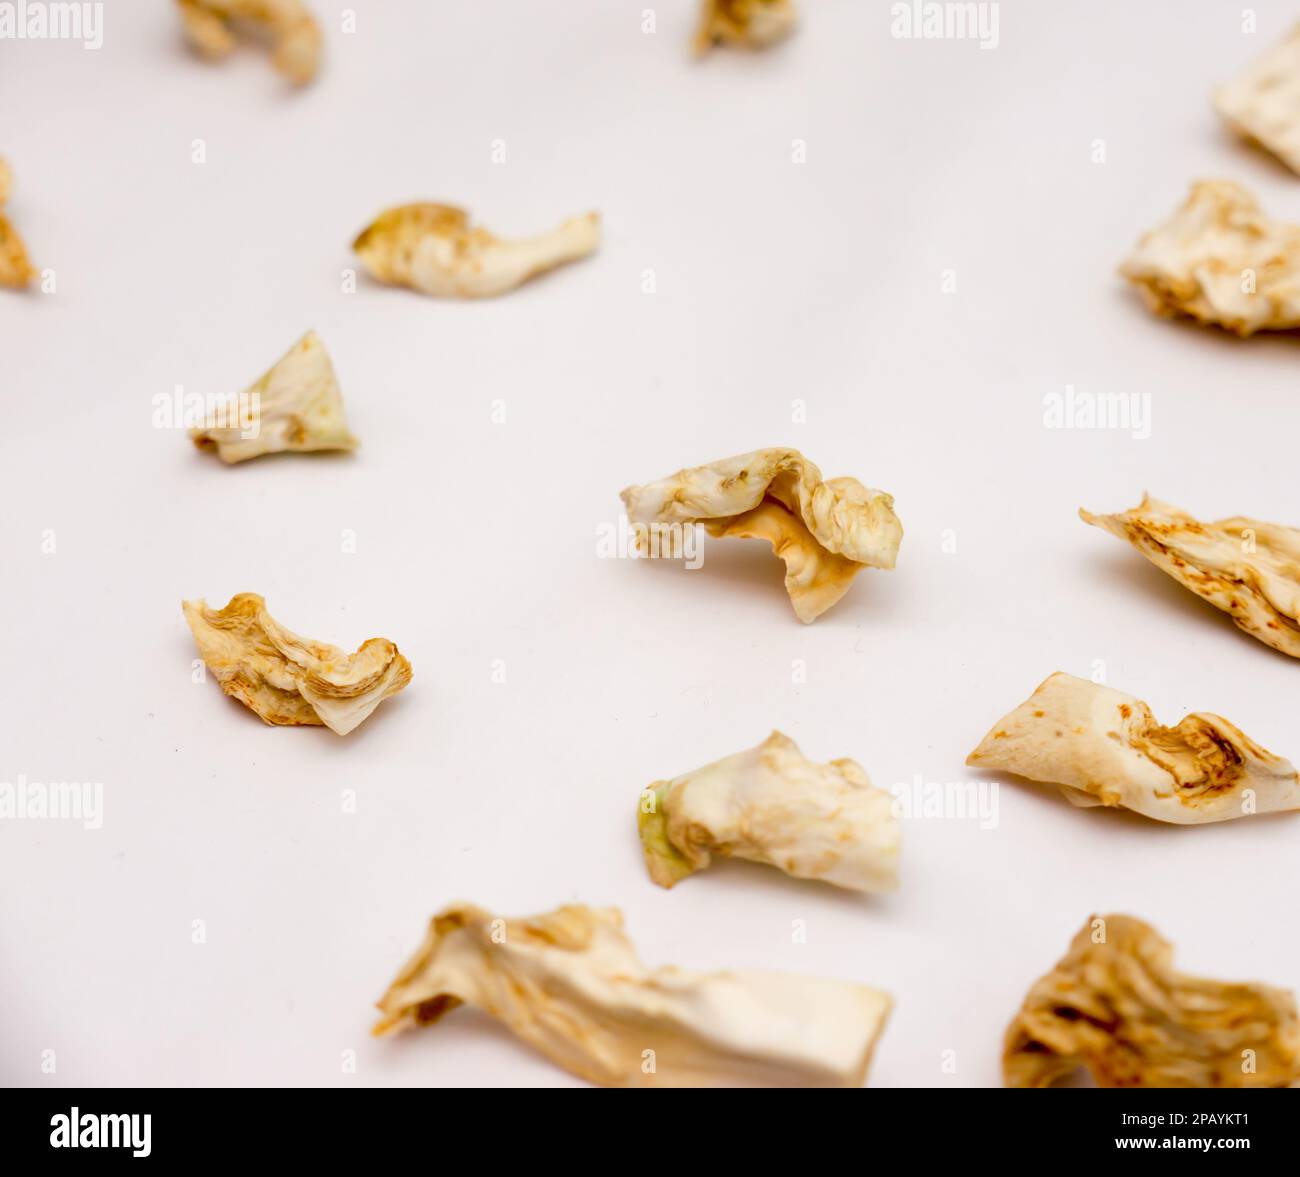 The Dried vegetable white celery. Stock Photo